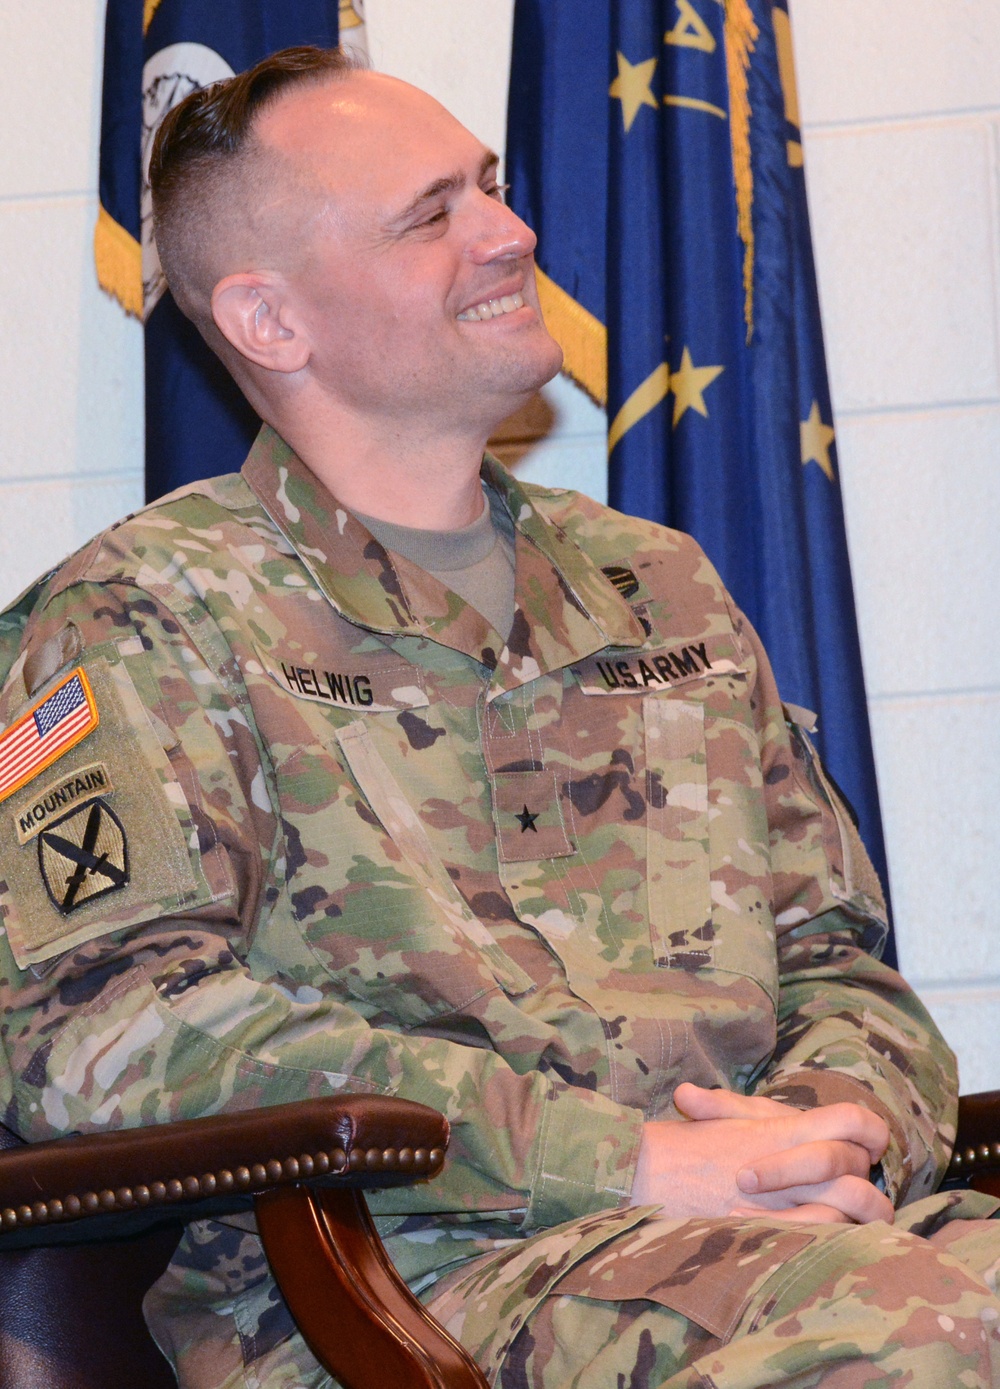 BG Smith takes helm of Trans Corps with ‘be bold’ leadership philosophy